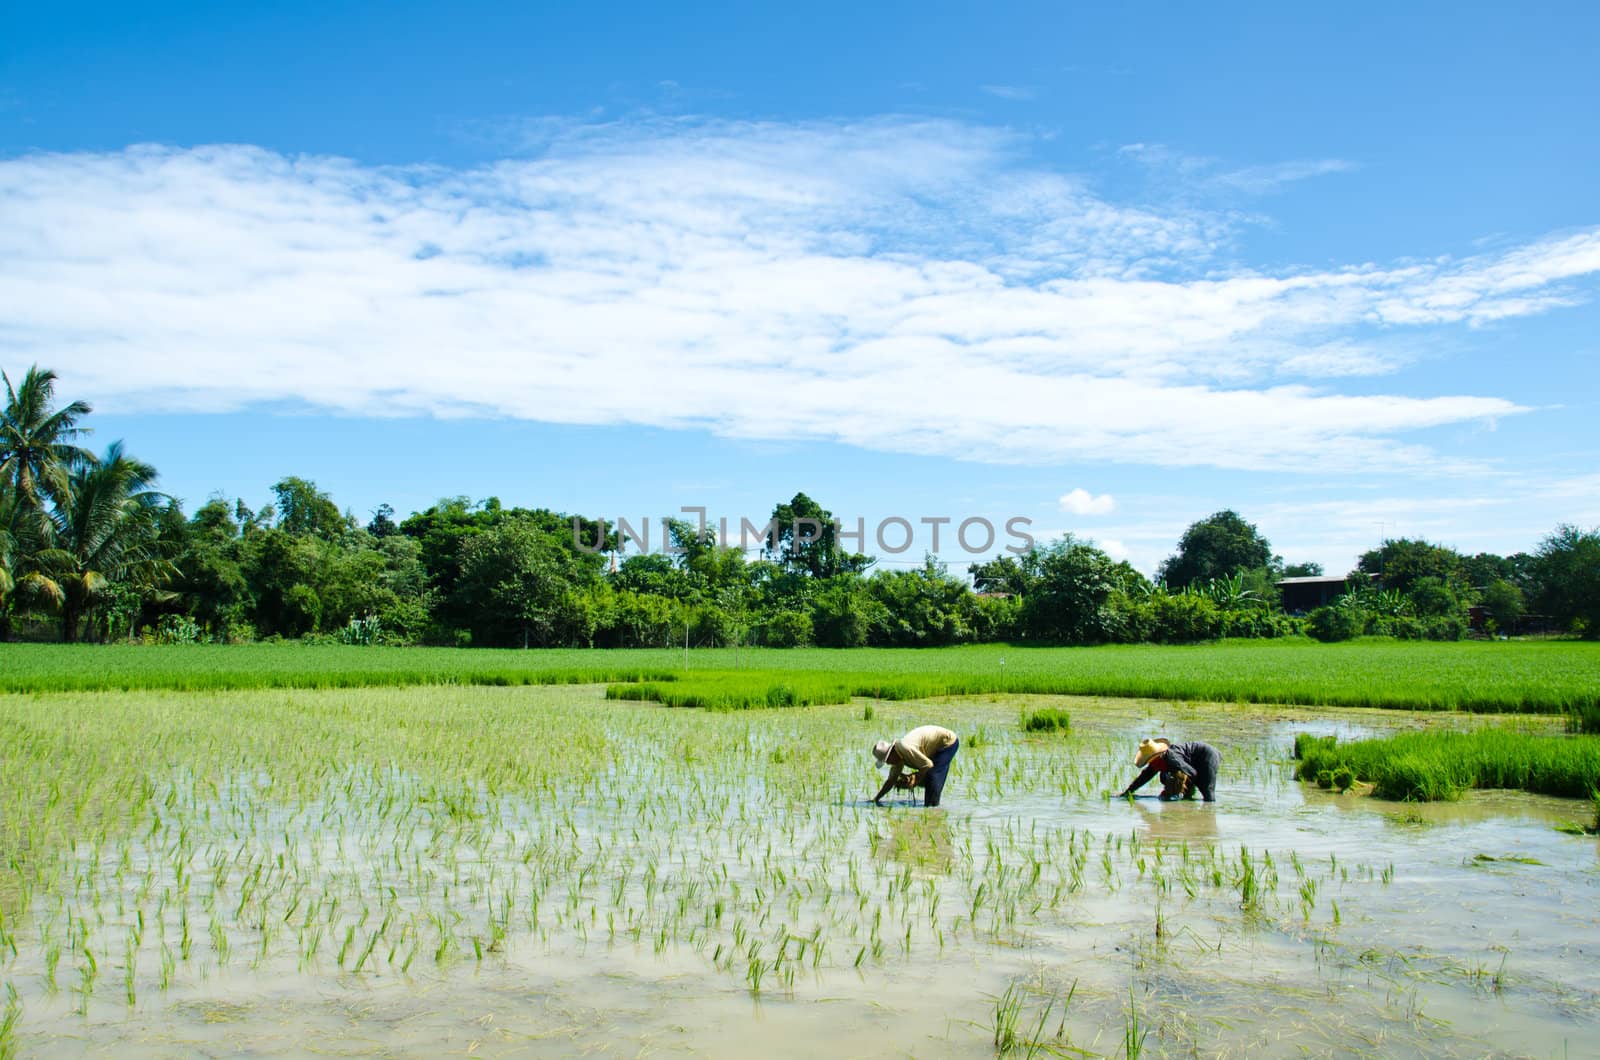 Farmers who are farming. By planting seedlings of rice in the rice.